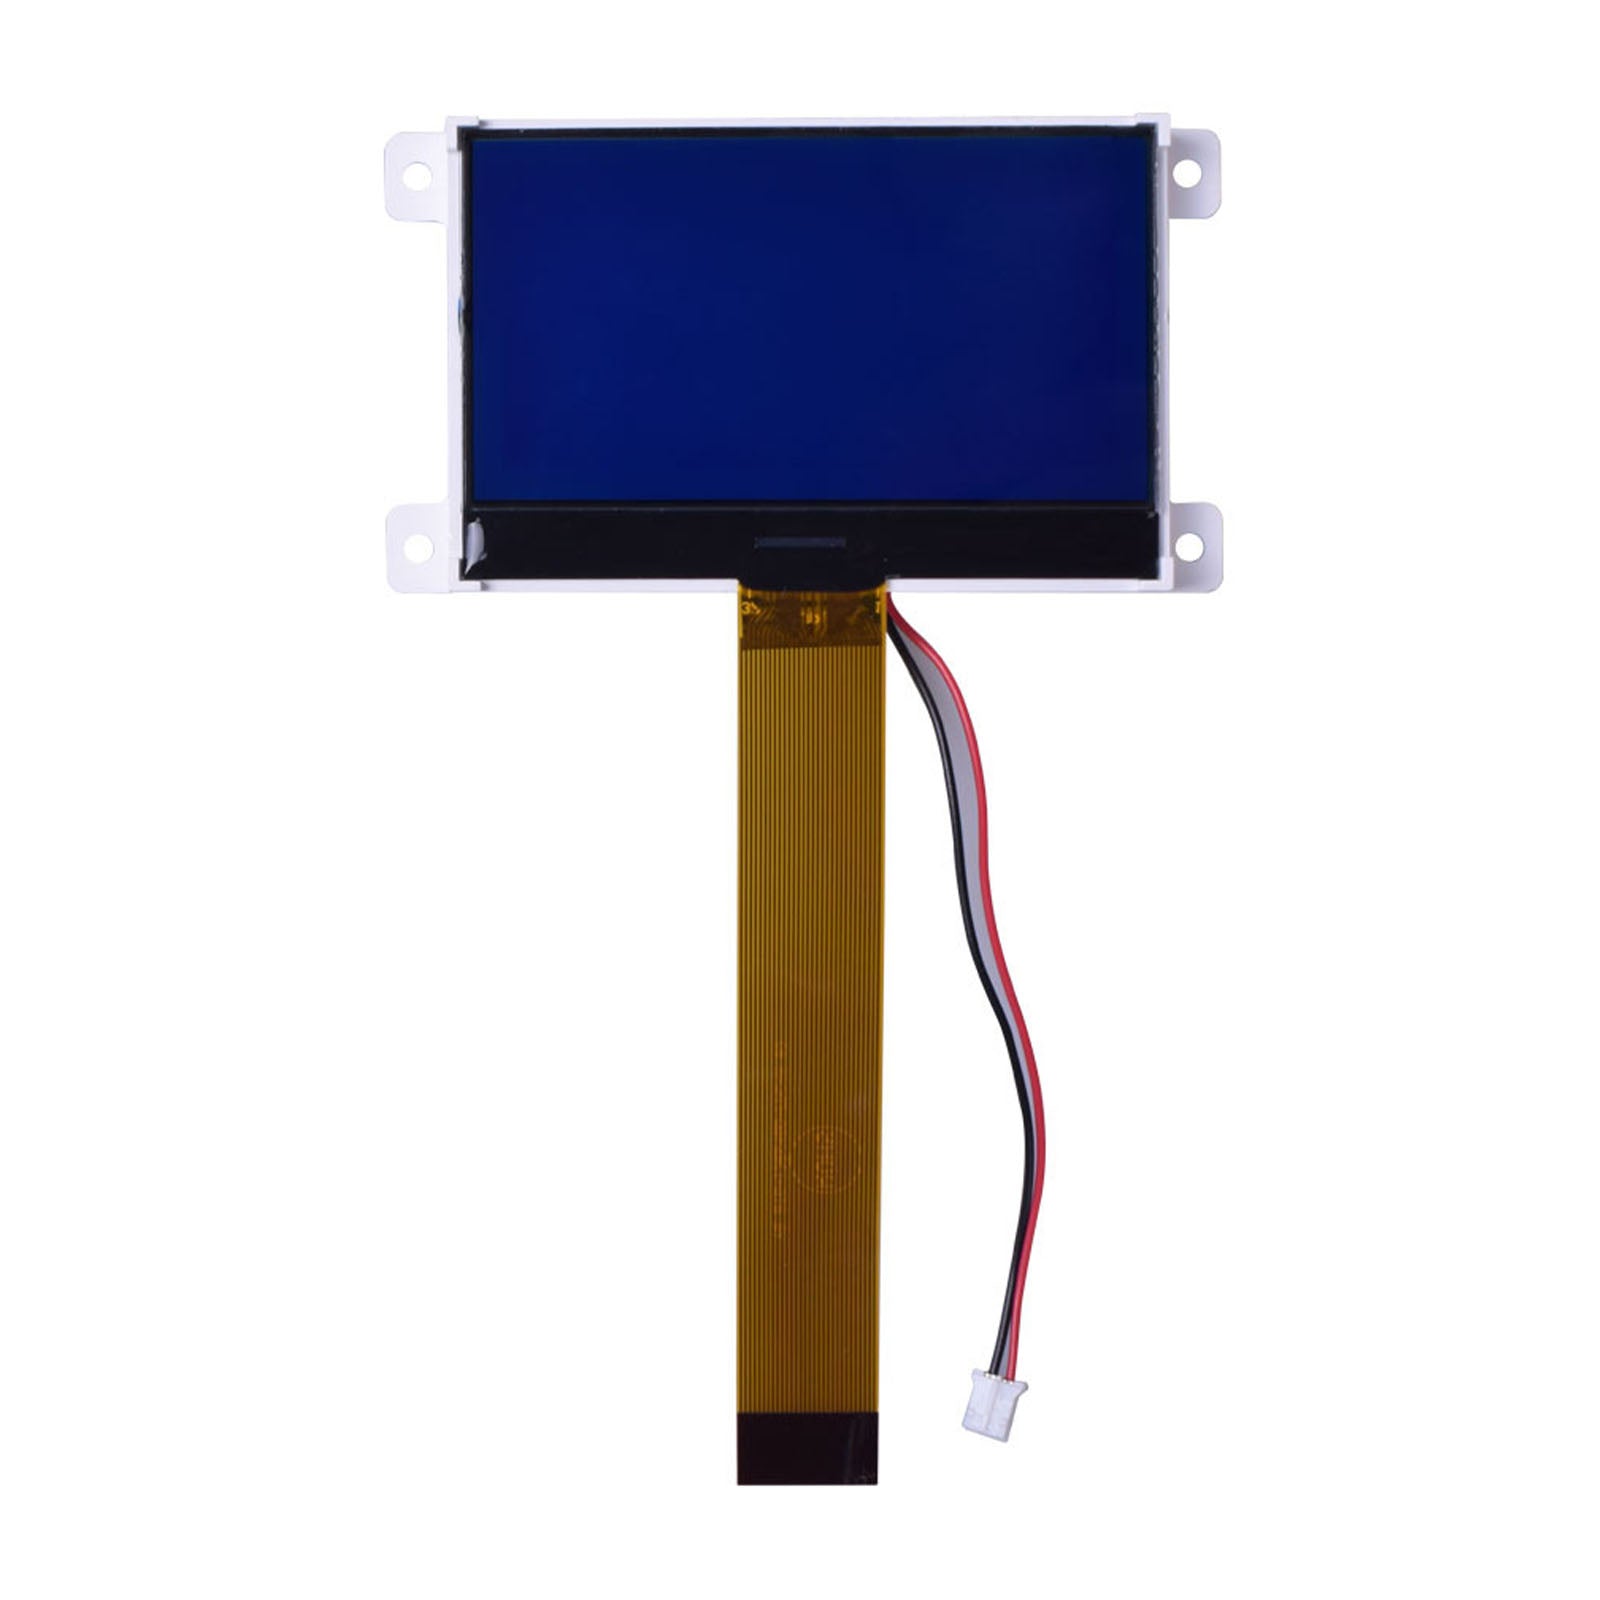 128x64 COG LCD 3.07 inch blue graphic display with MCU and SPI interfaces